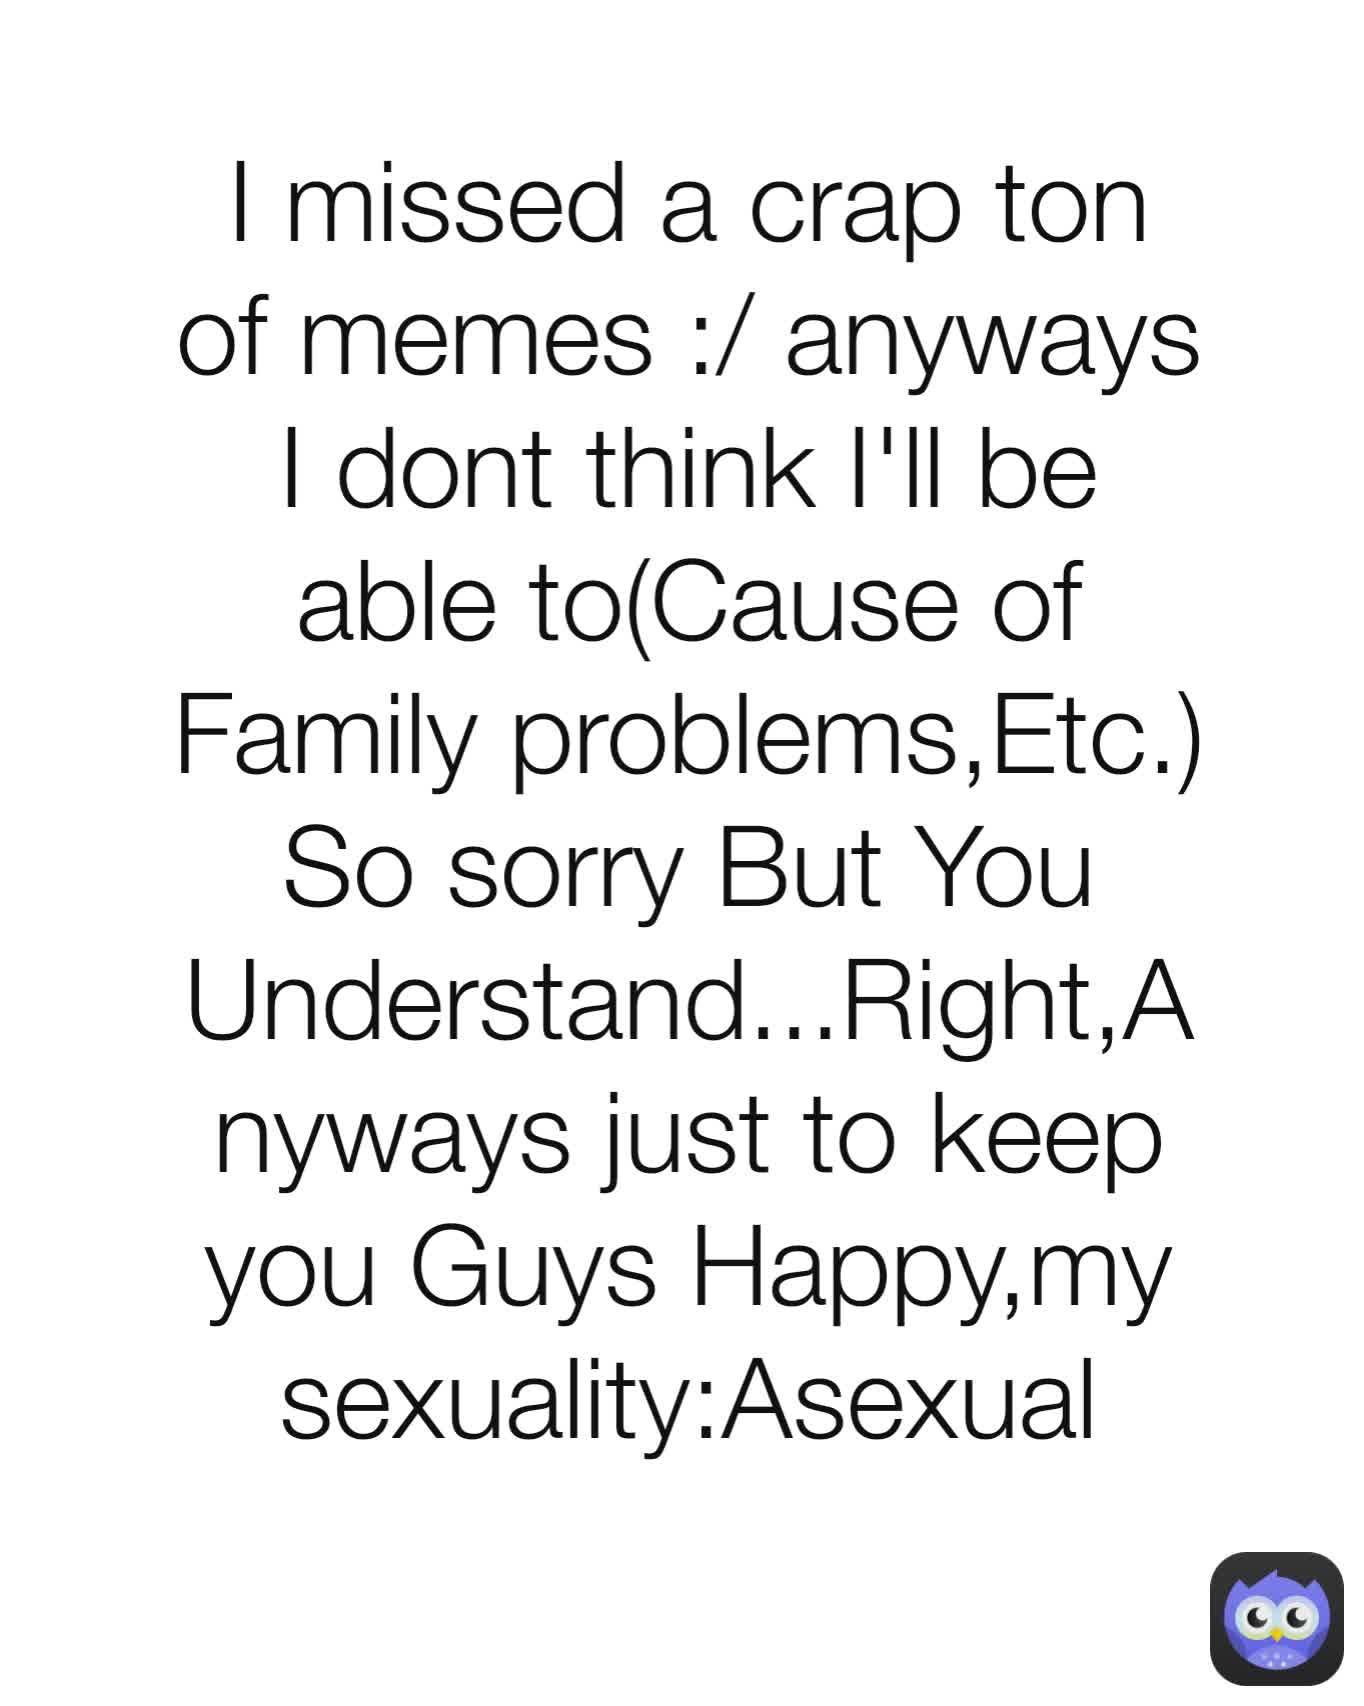 I missed a crap ton of memes :/ anyways I dont think I'll be able to(Cause of Family problems,Etc.) So sorry But You Understand...Right,Anyways just to keep you Guys Happy,my sexuality:Asexual